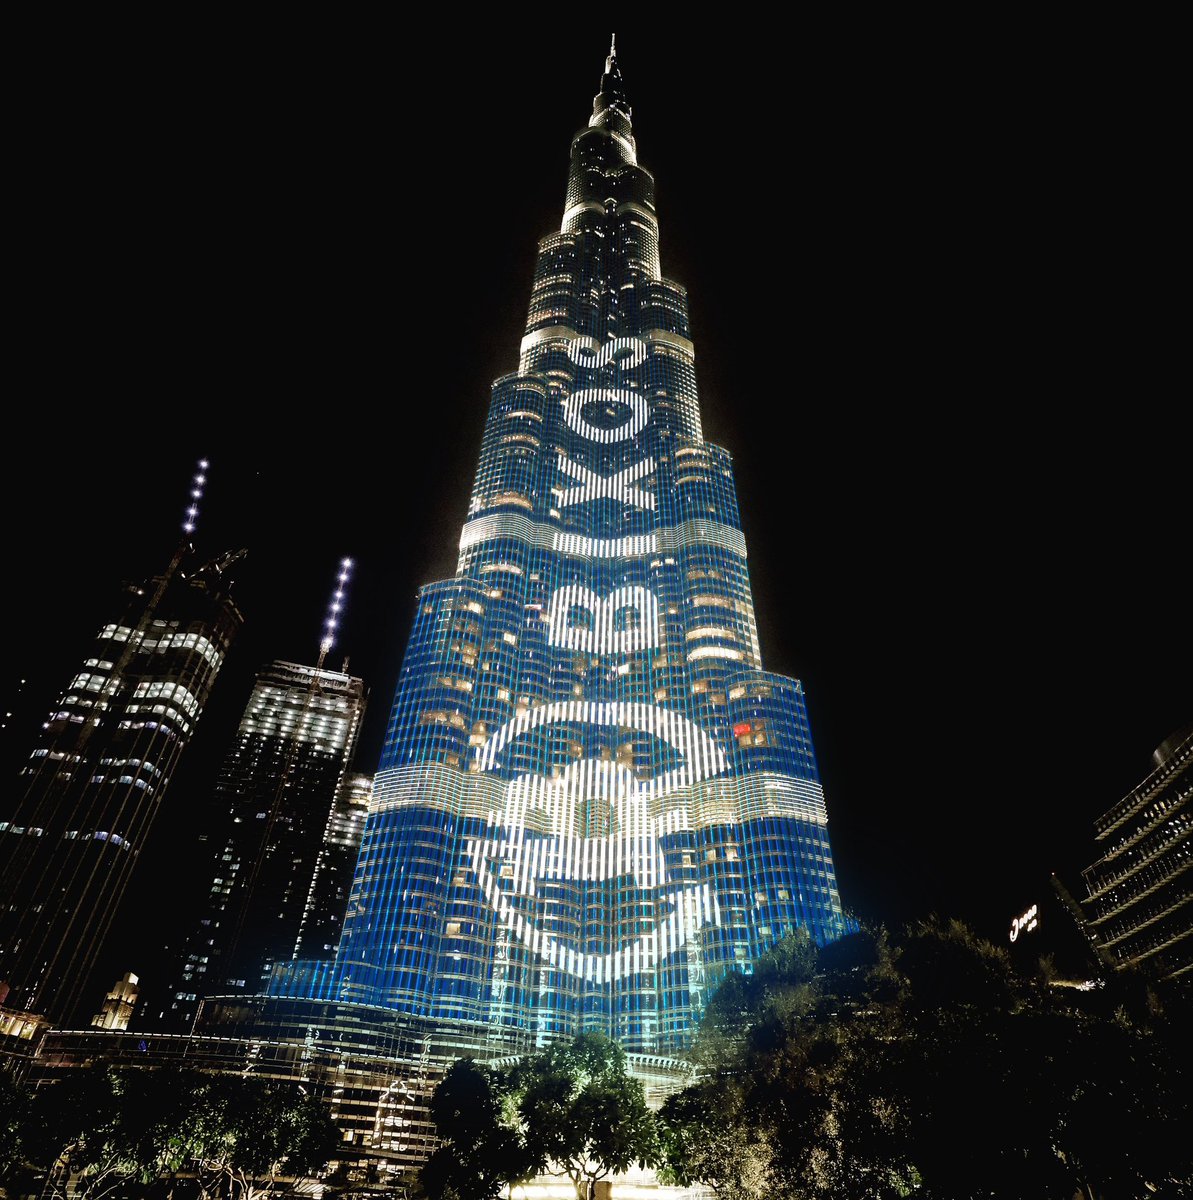 The $UBXS logo is now on the Burj Khalifa tower. Exciting developments continue. Dubai is the world leader in the real estate sector and @Bixosinc will be the leader in the Crypto Real Estate sector. #Crypto #Cryptocurency